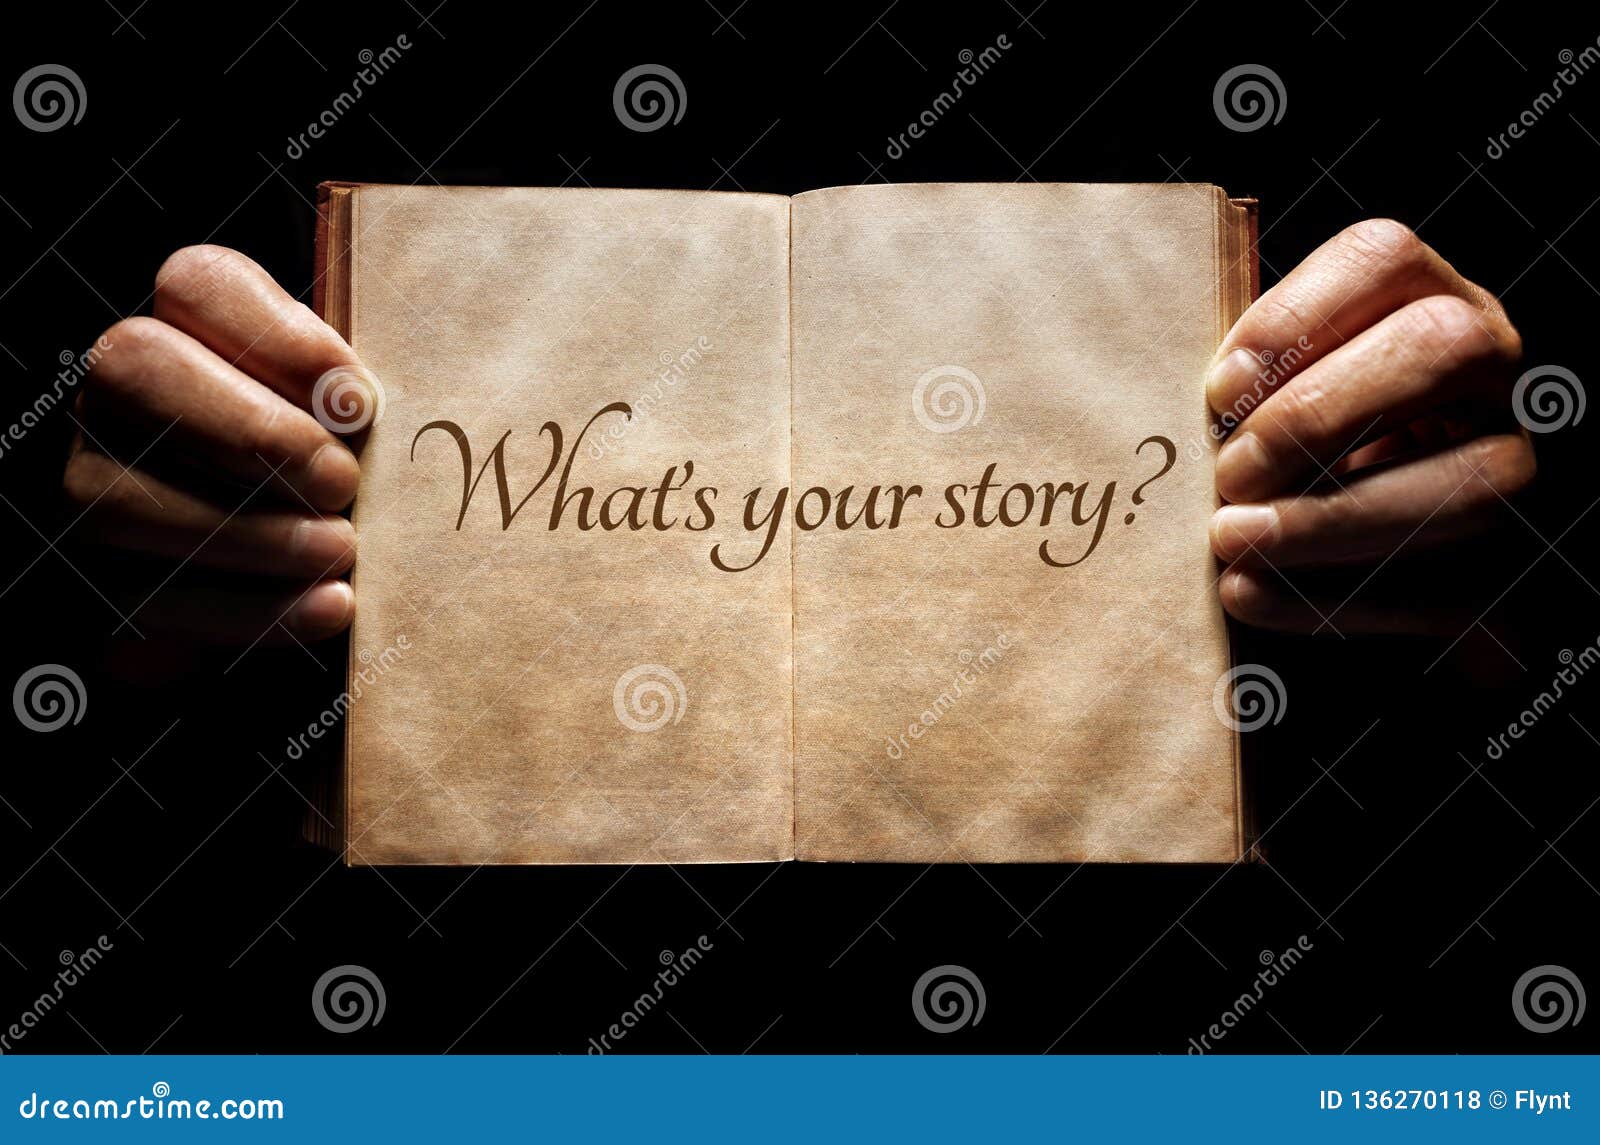 what`s your story? hands holding an open book background